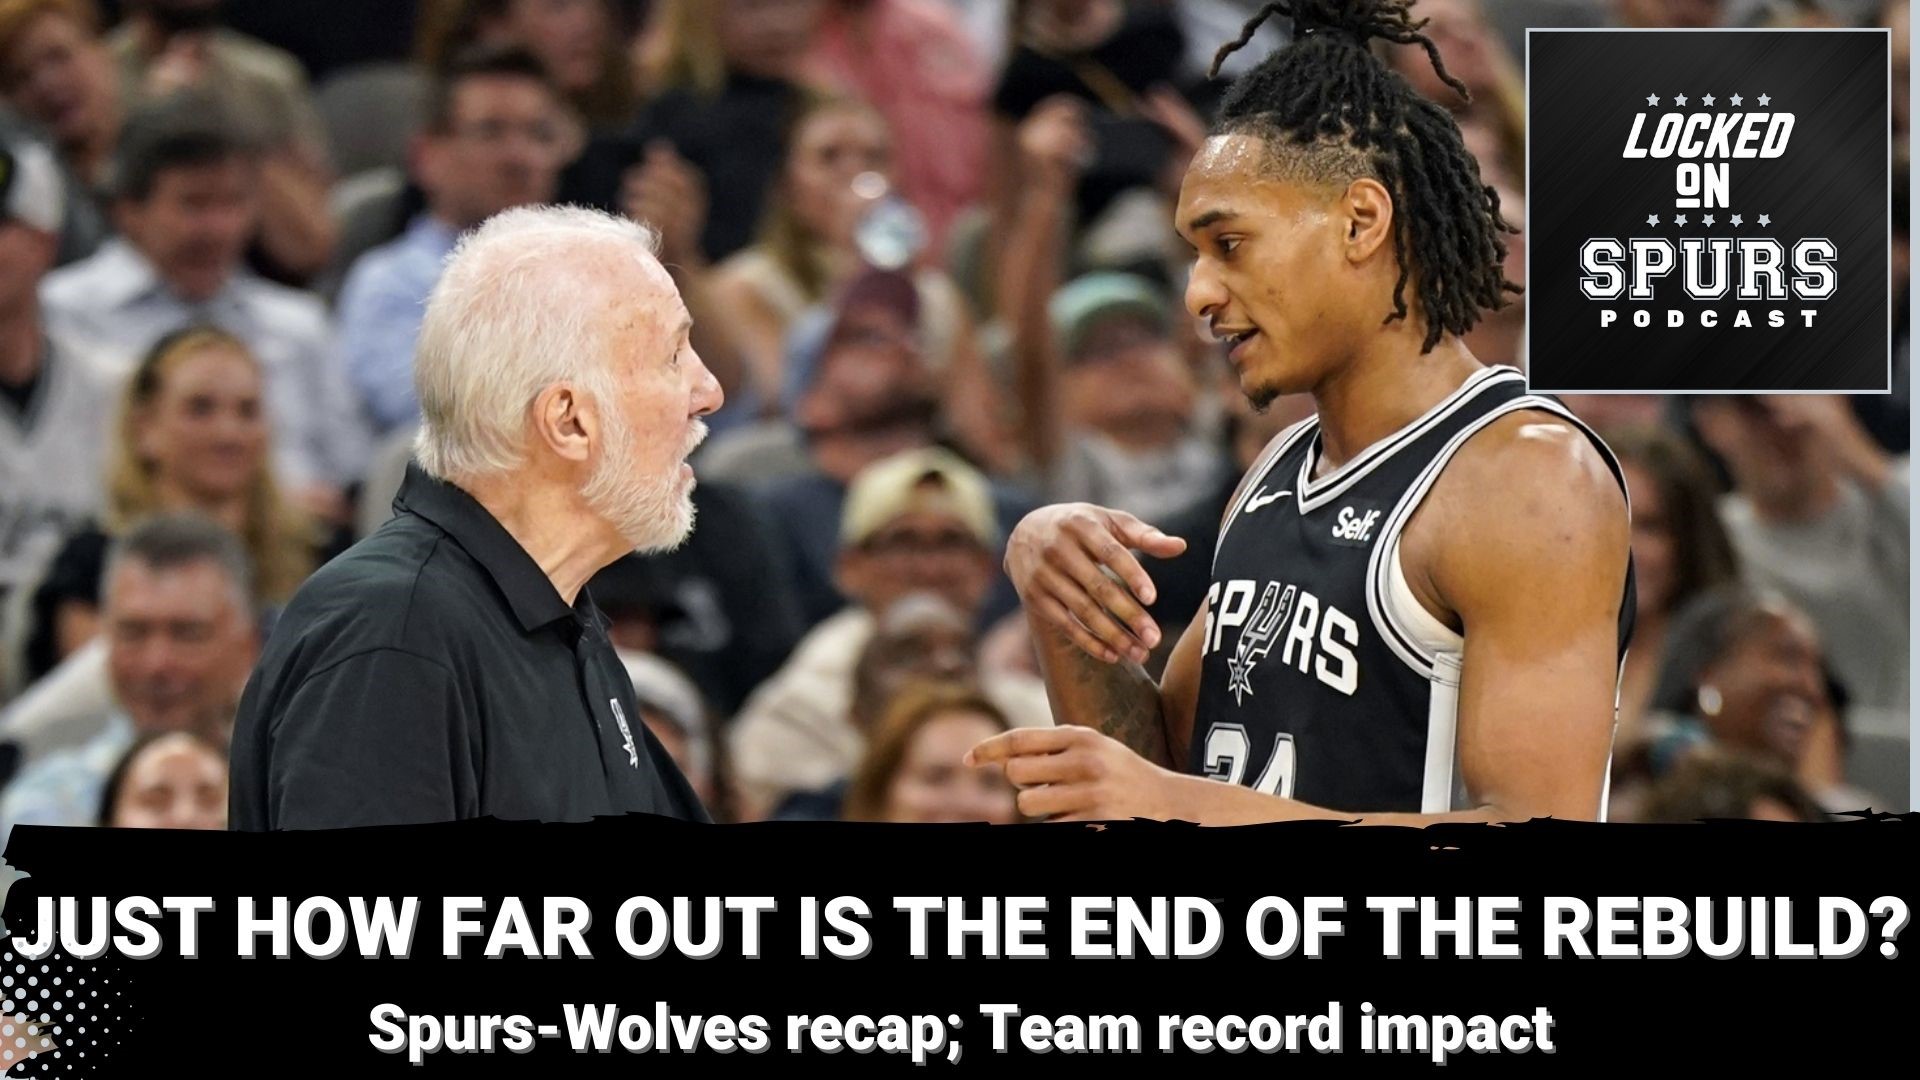 Also, what are some takeaways from the Spurs' loss versus the Wolves?